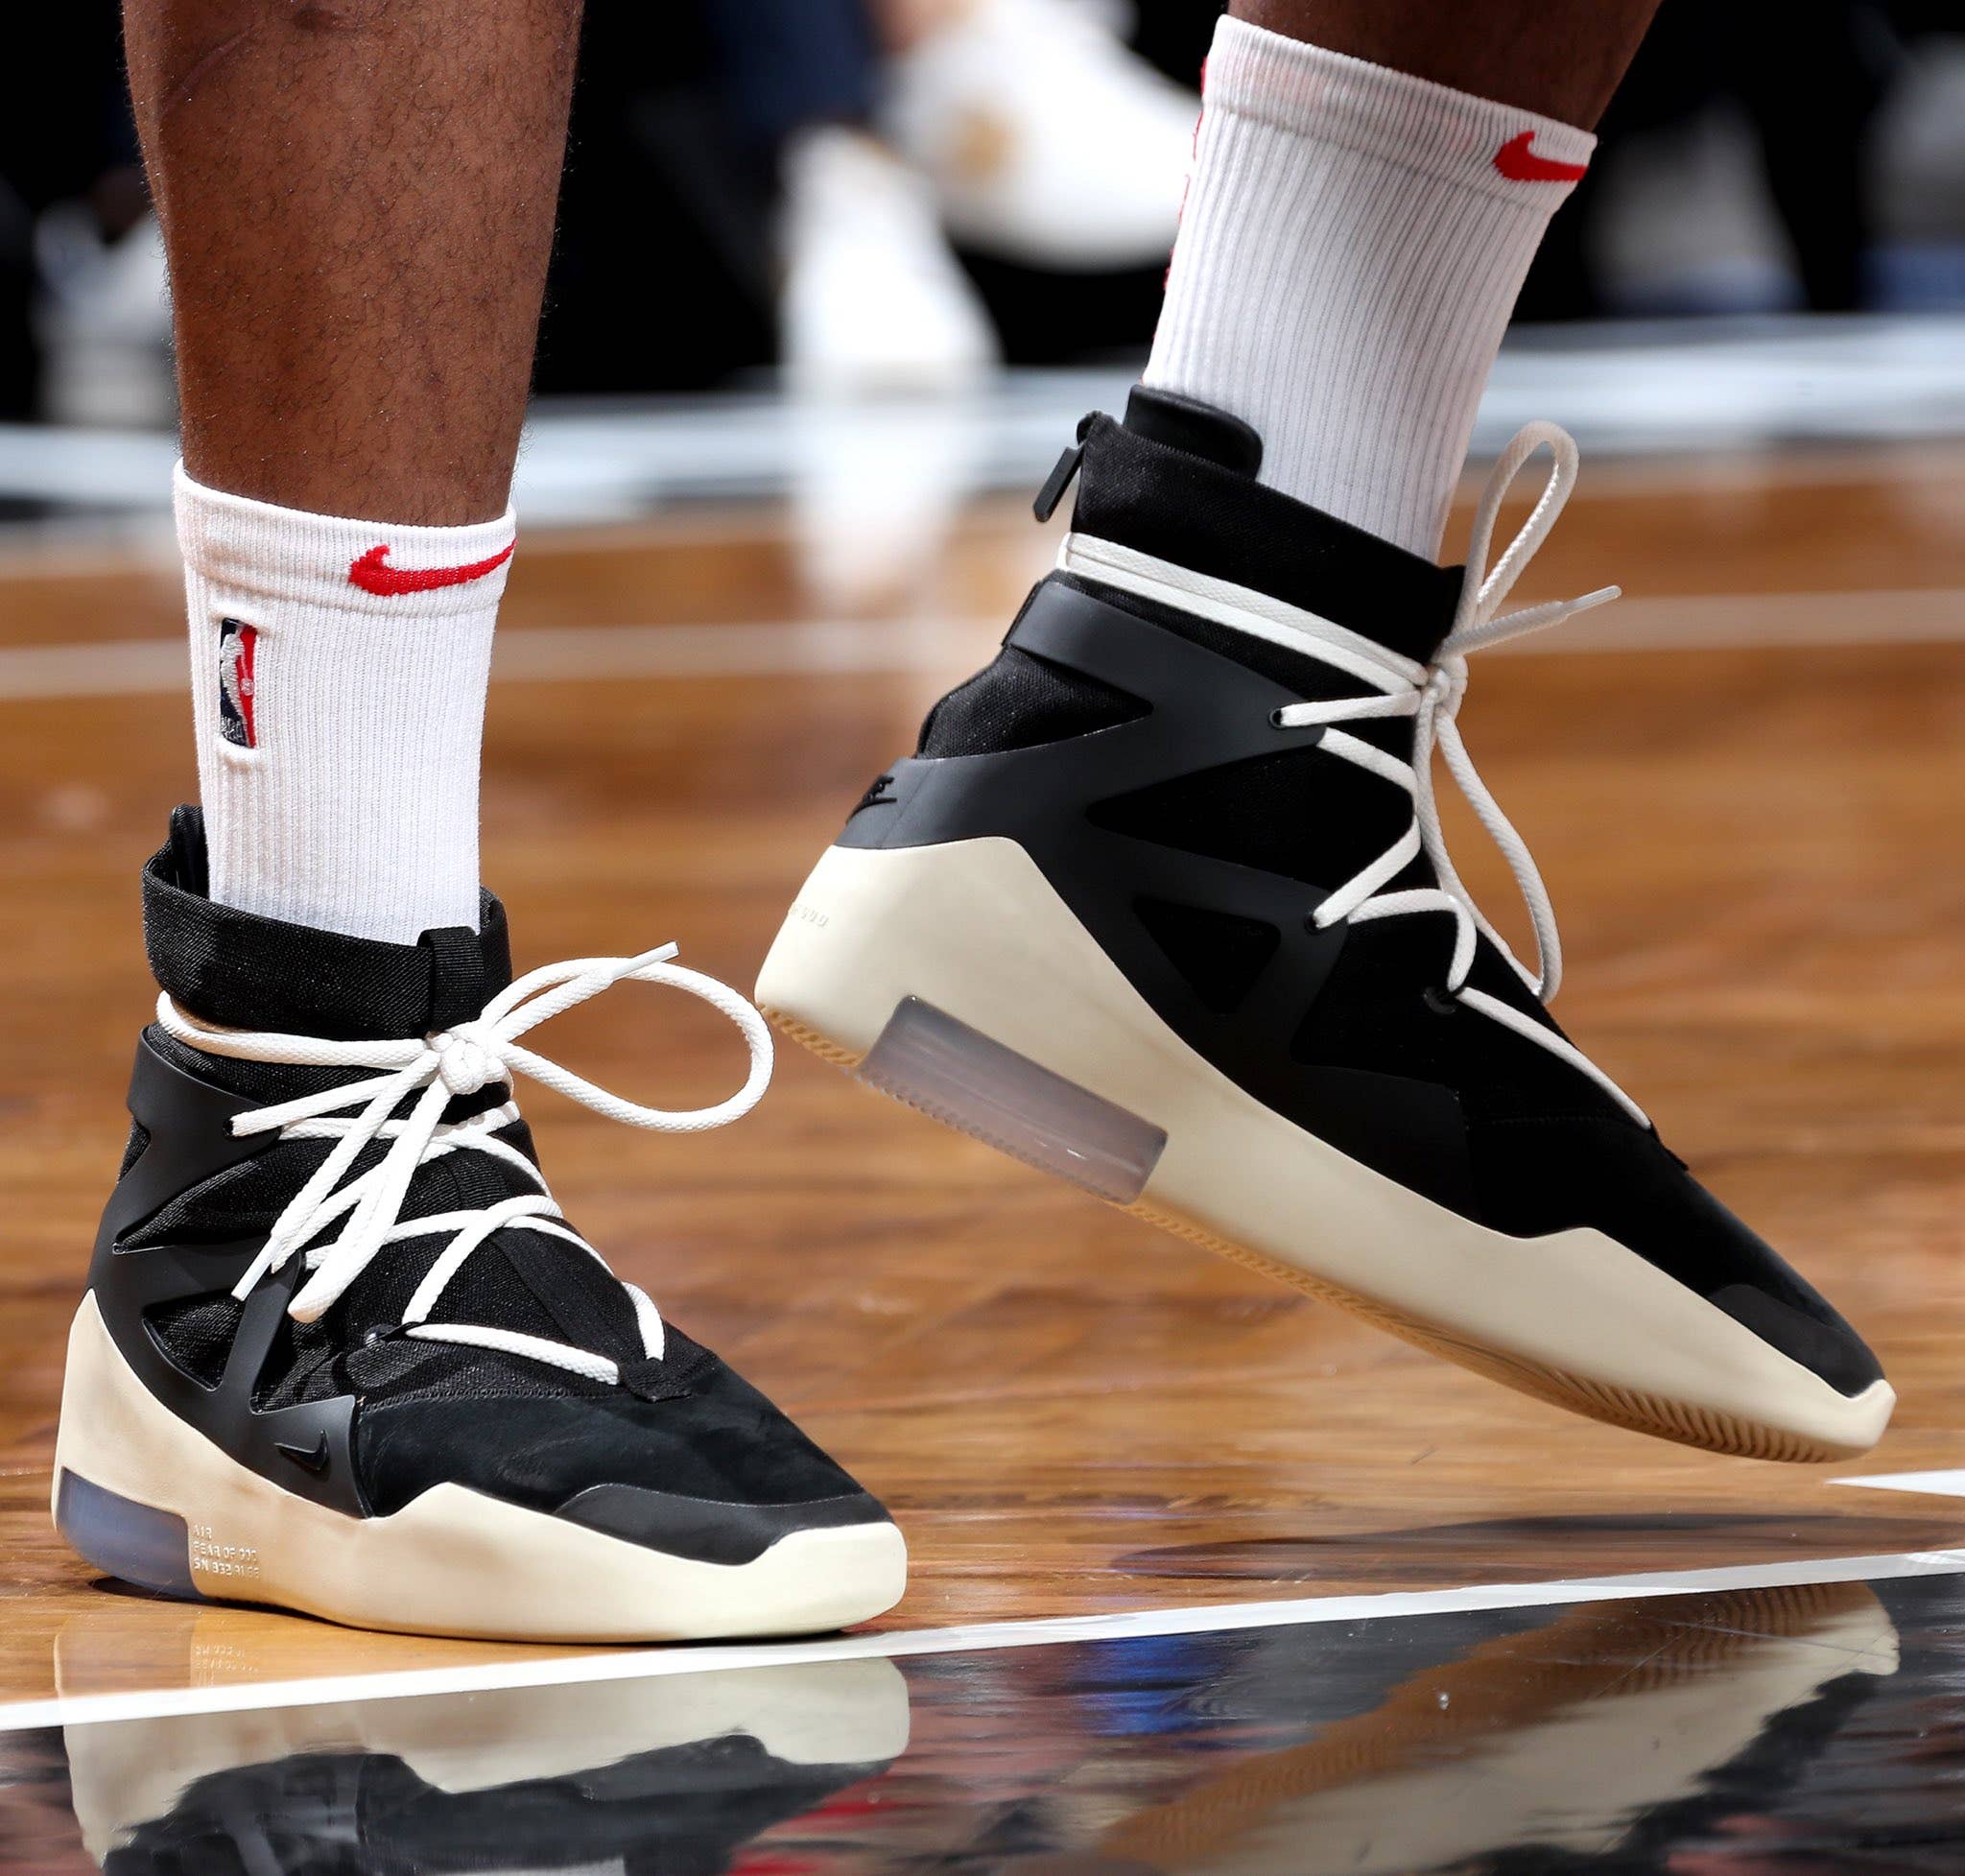 P.J. Tucker Plays in Jerry Fear of God Collaboration | Complex